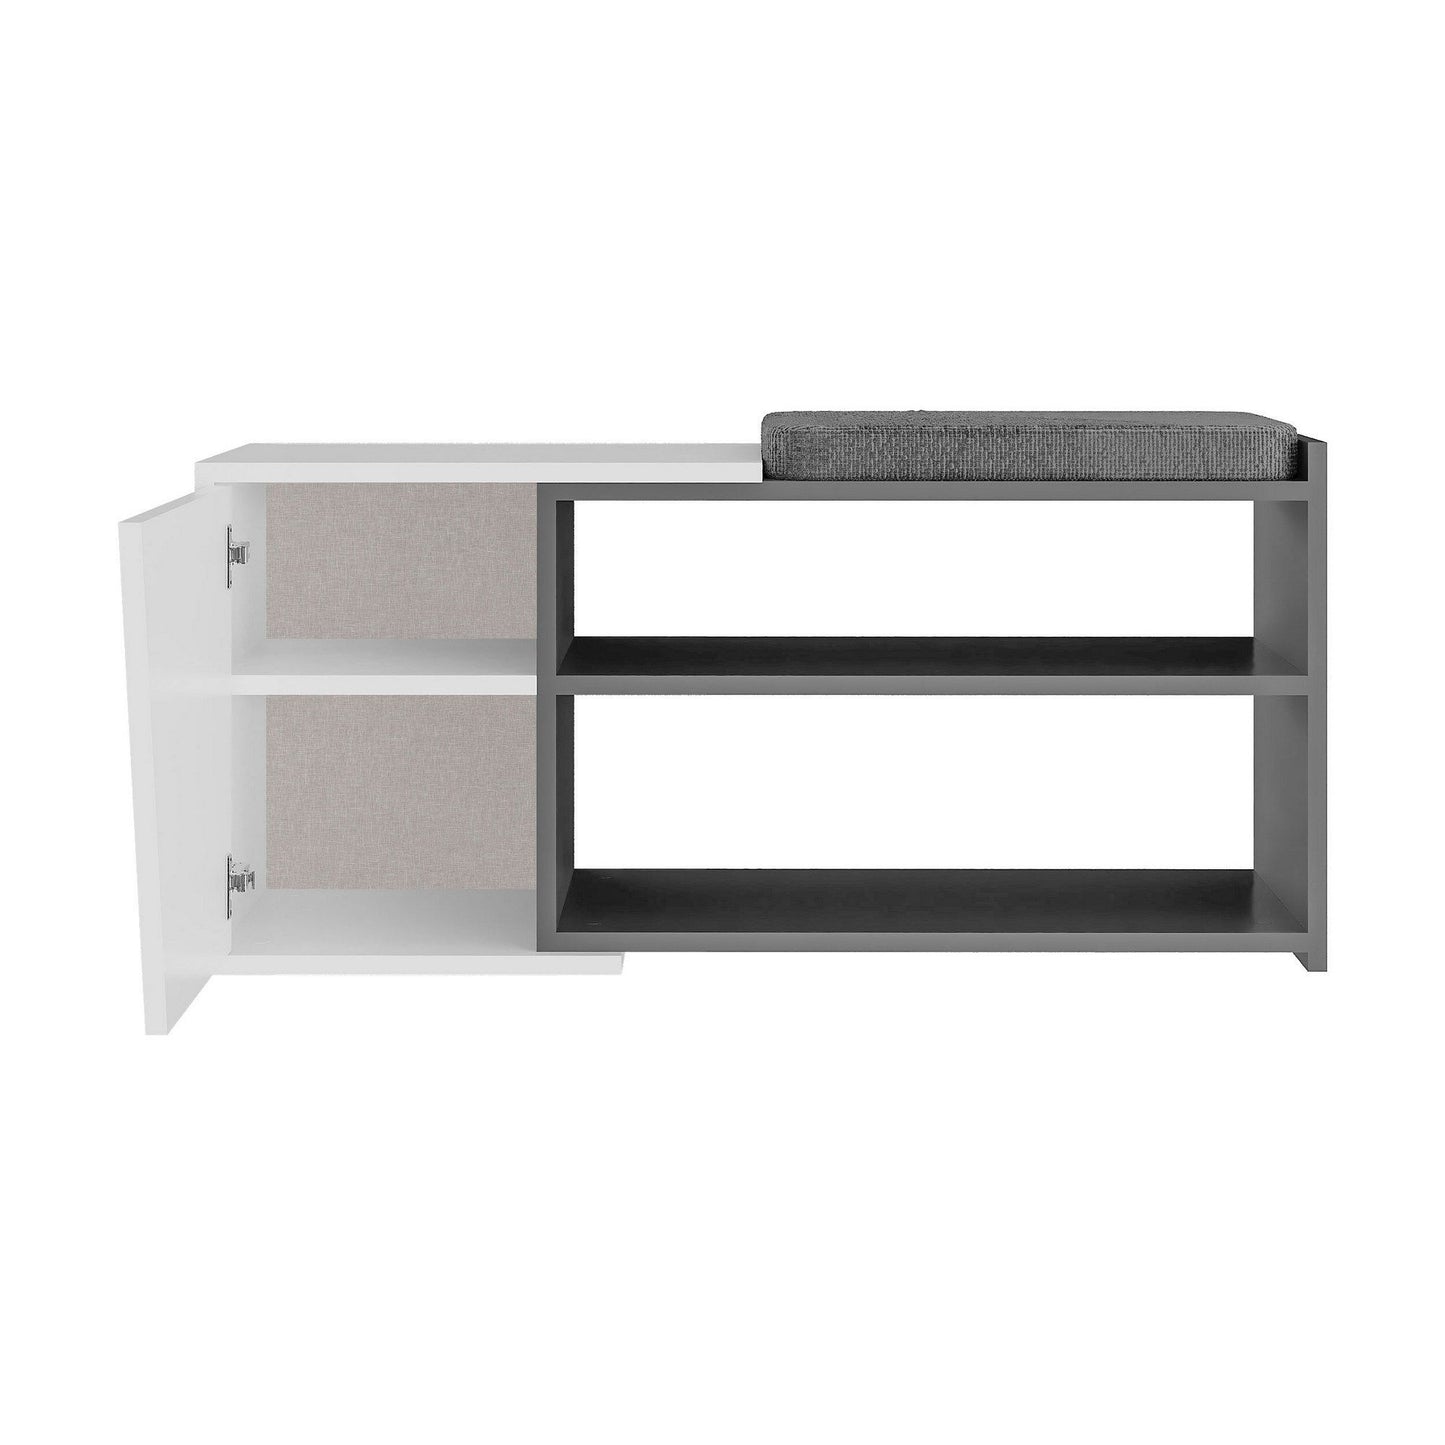 Fiona Bench - Anthracite, White - Shoe Cabinet